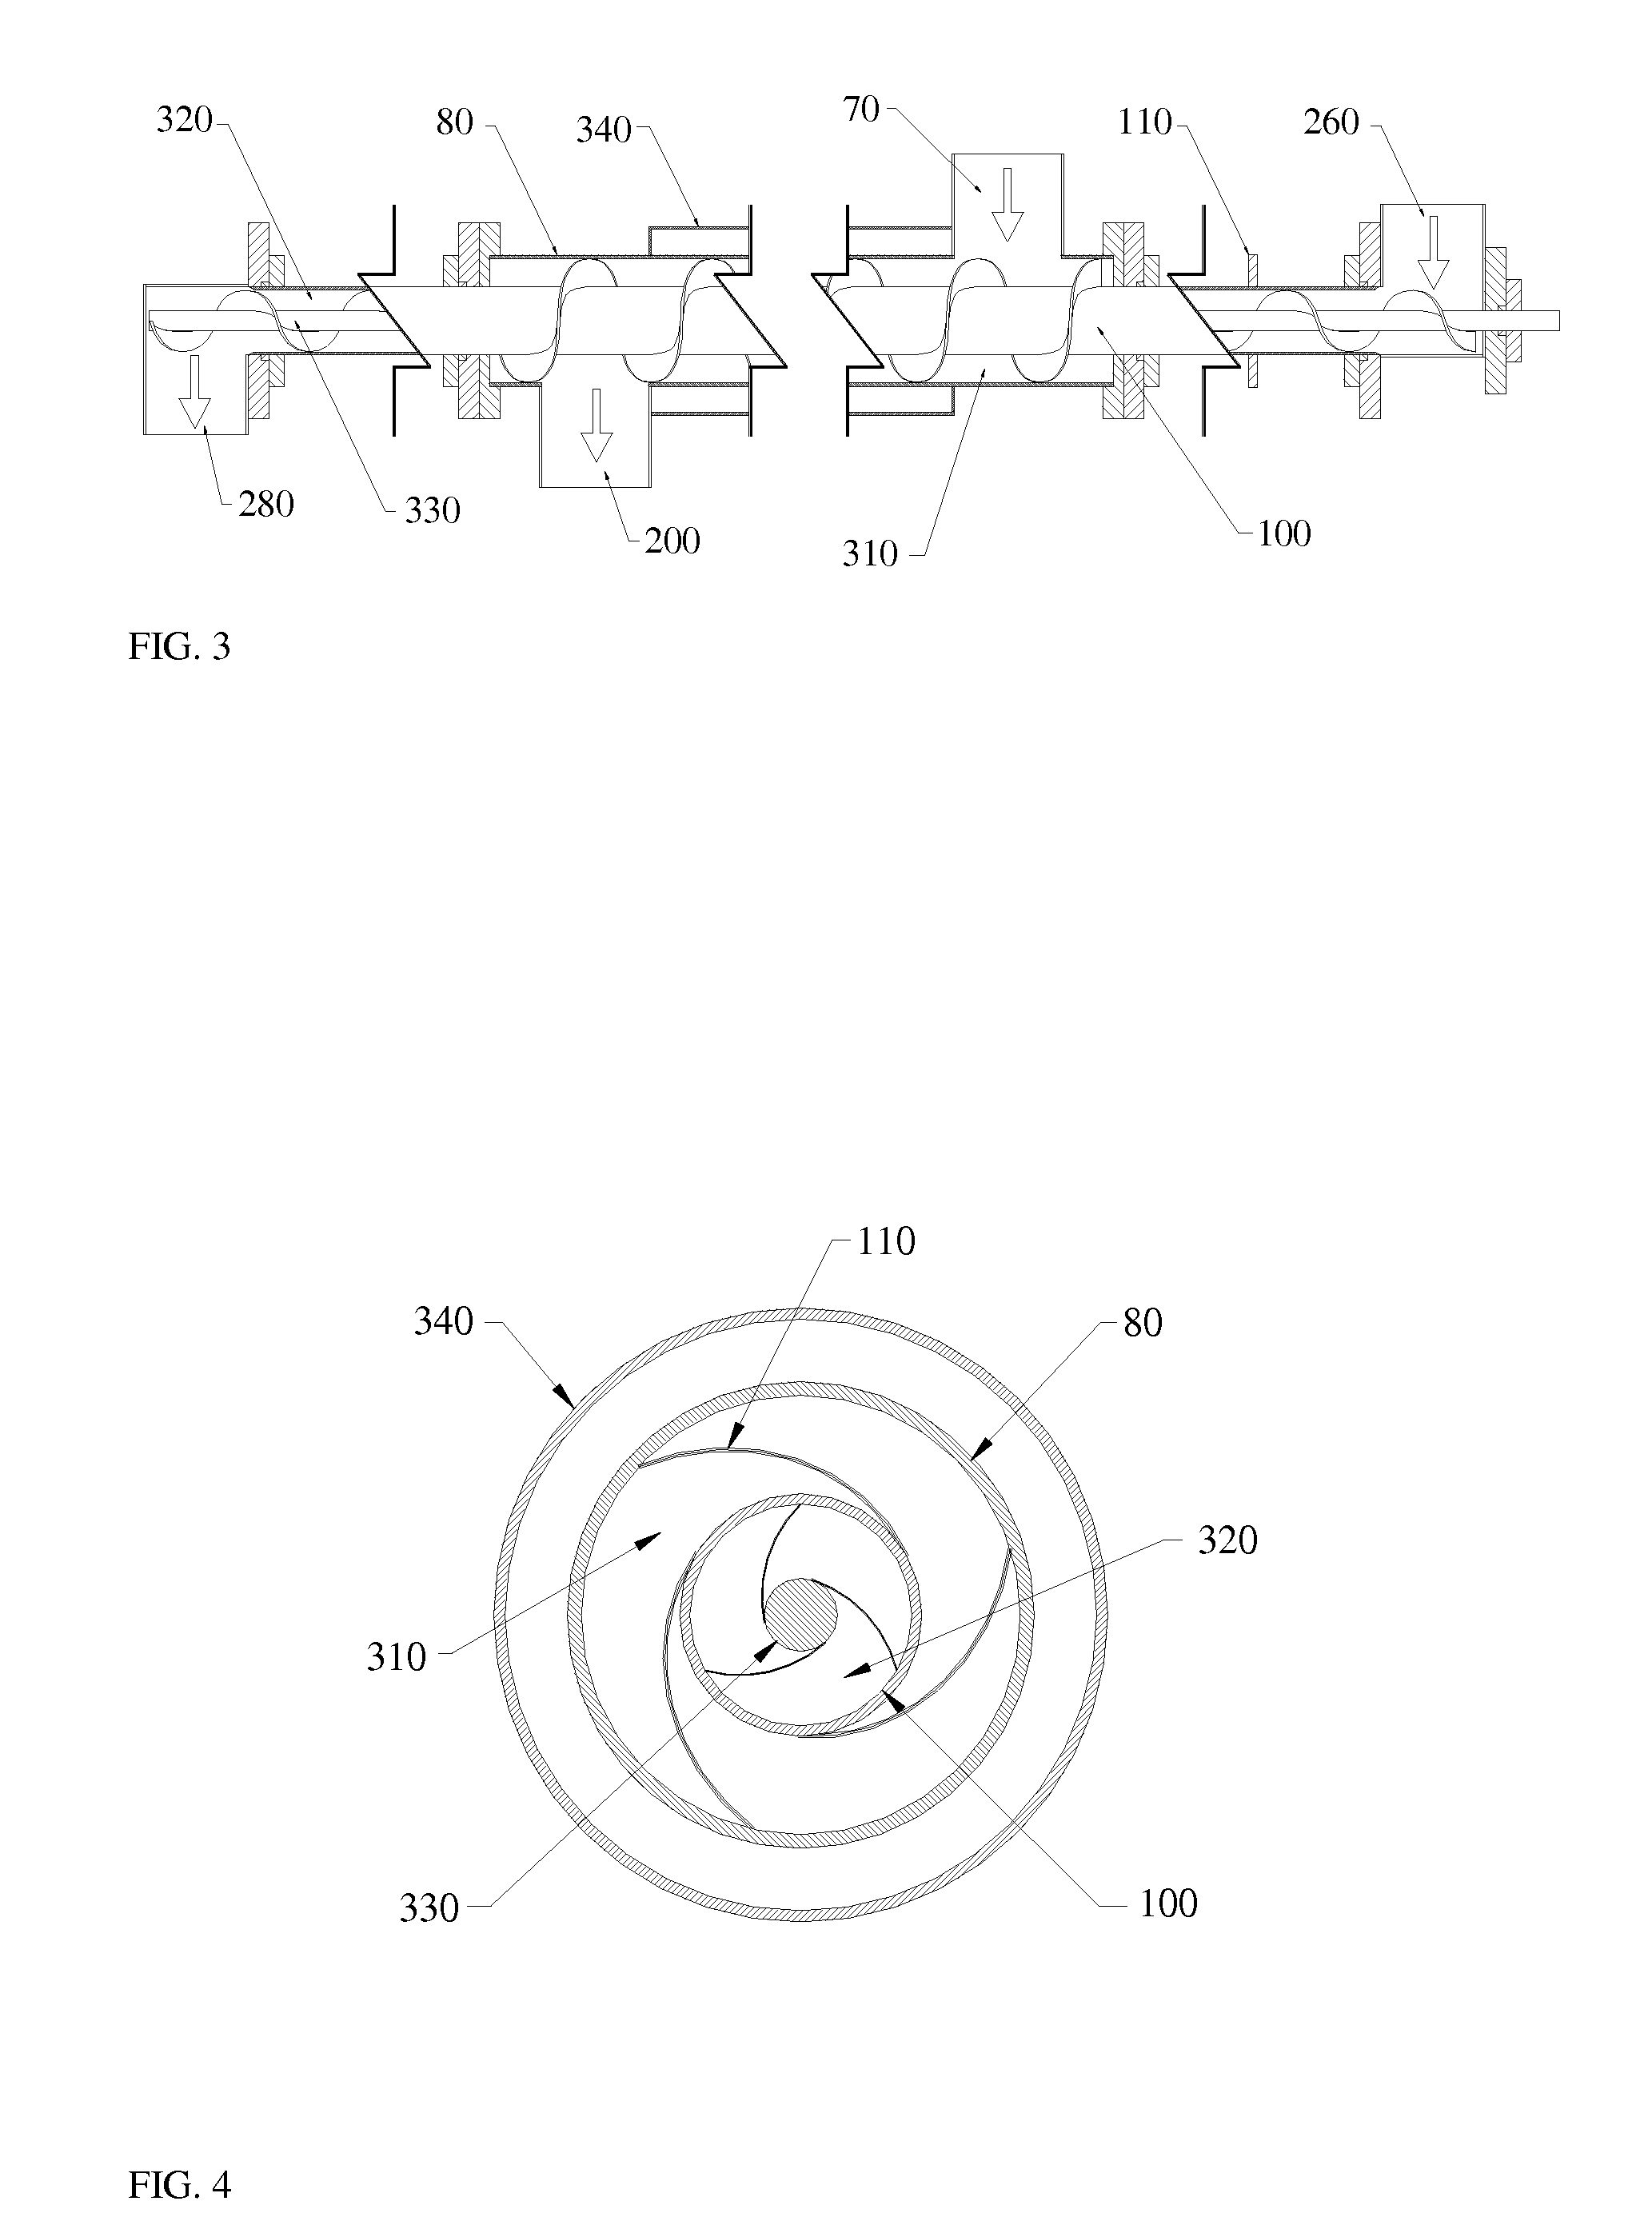 Thermal transfer mechanisms for an auger pyrolysis reactor